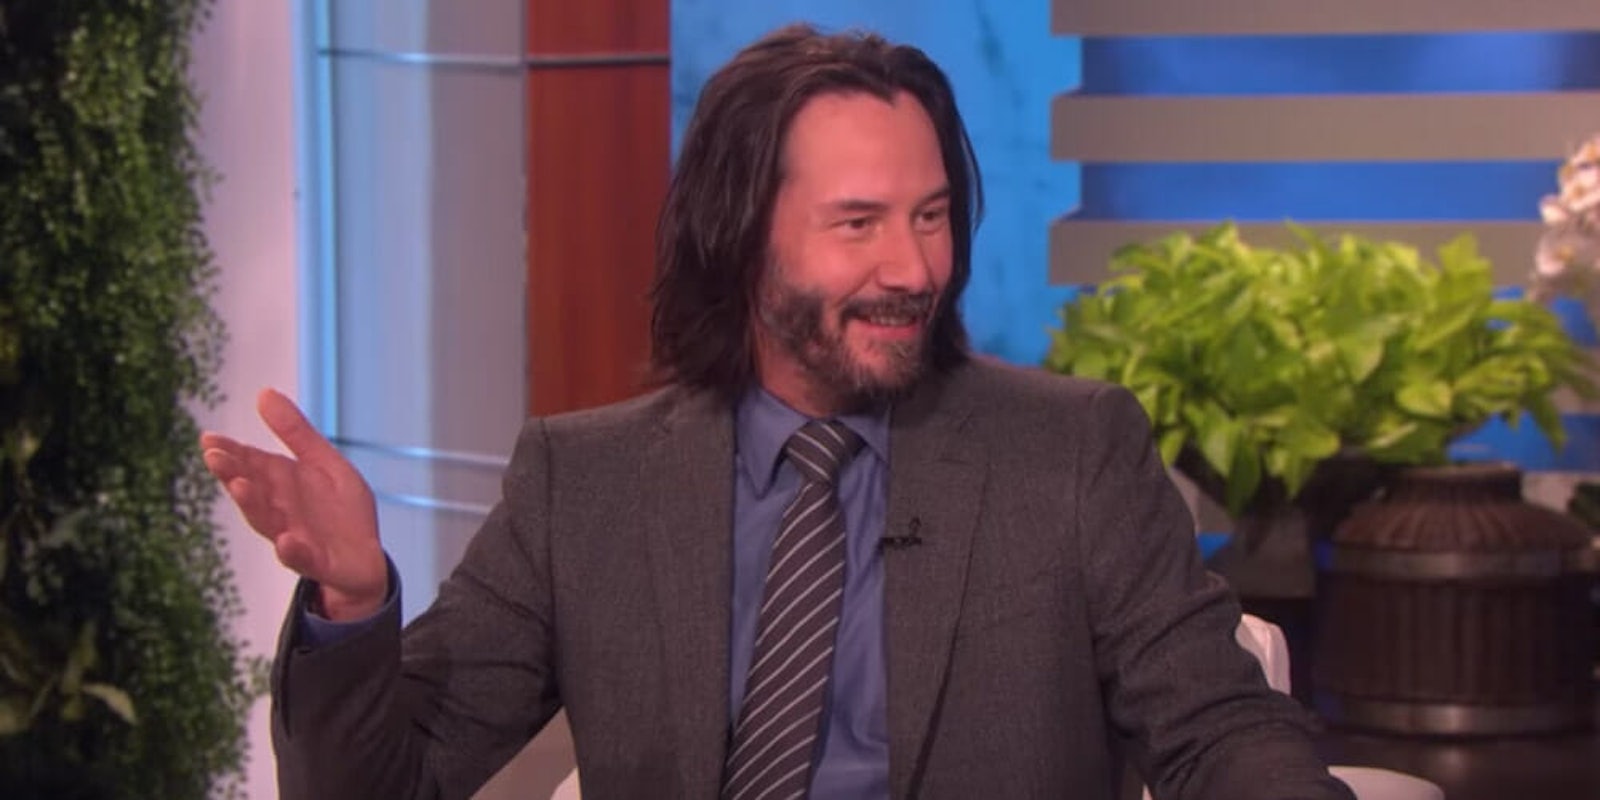 keanu-reeves-time-person-of-the-year-petition